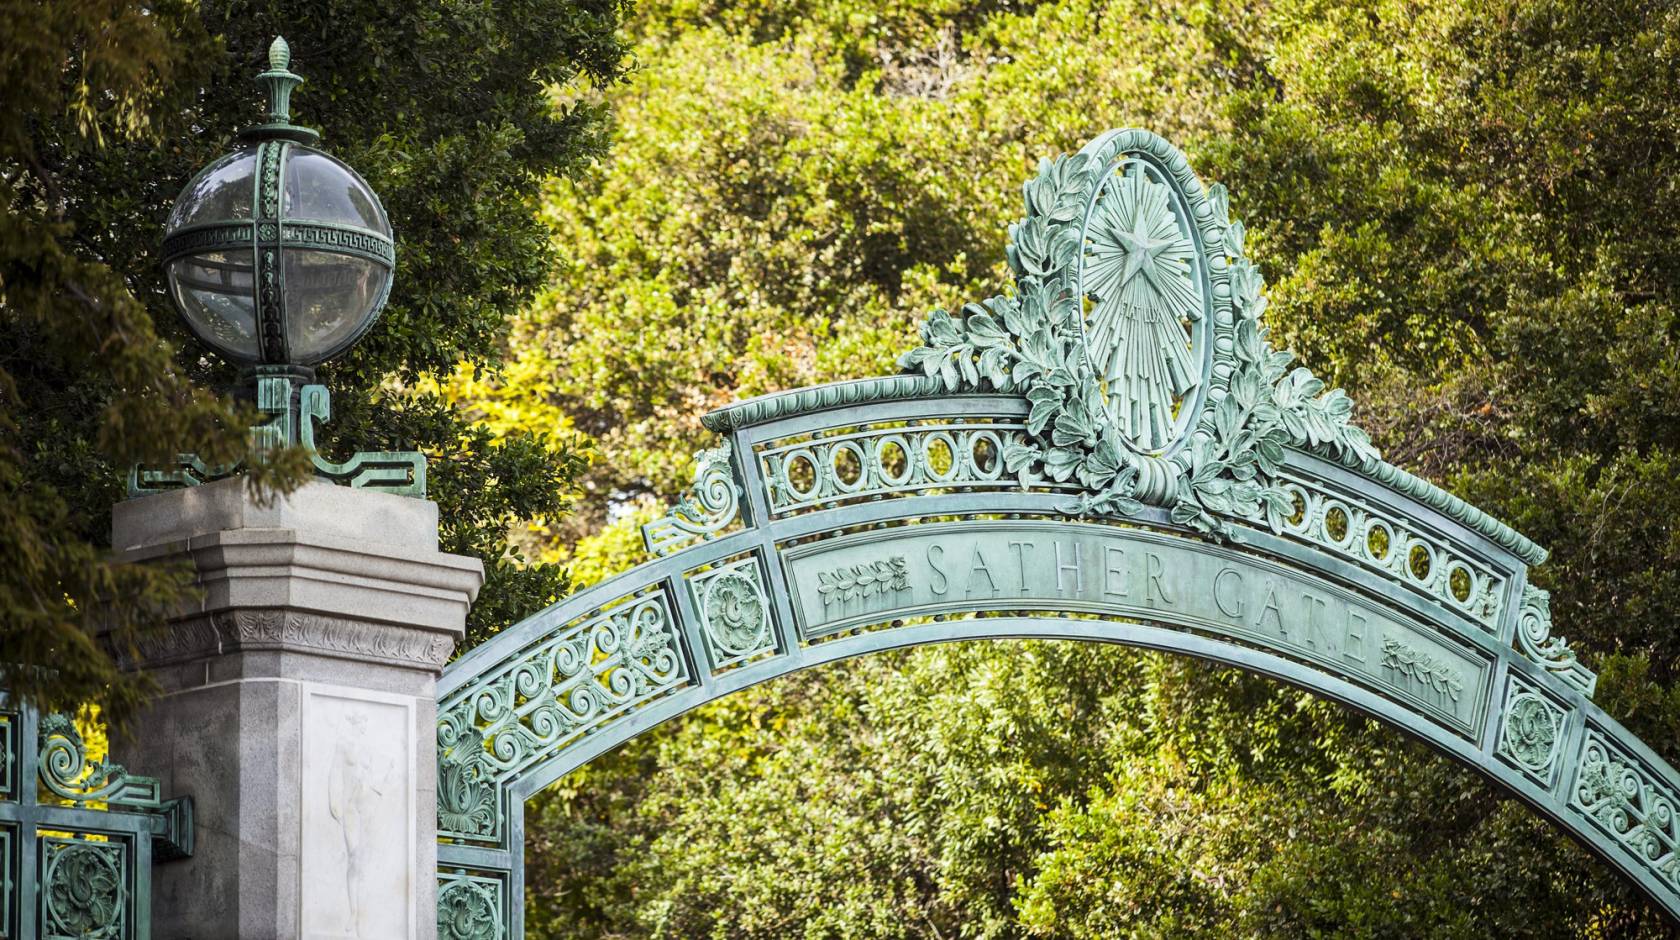 View of Sather Gate UC Berkeley